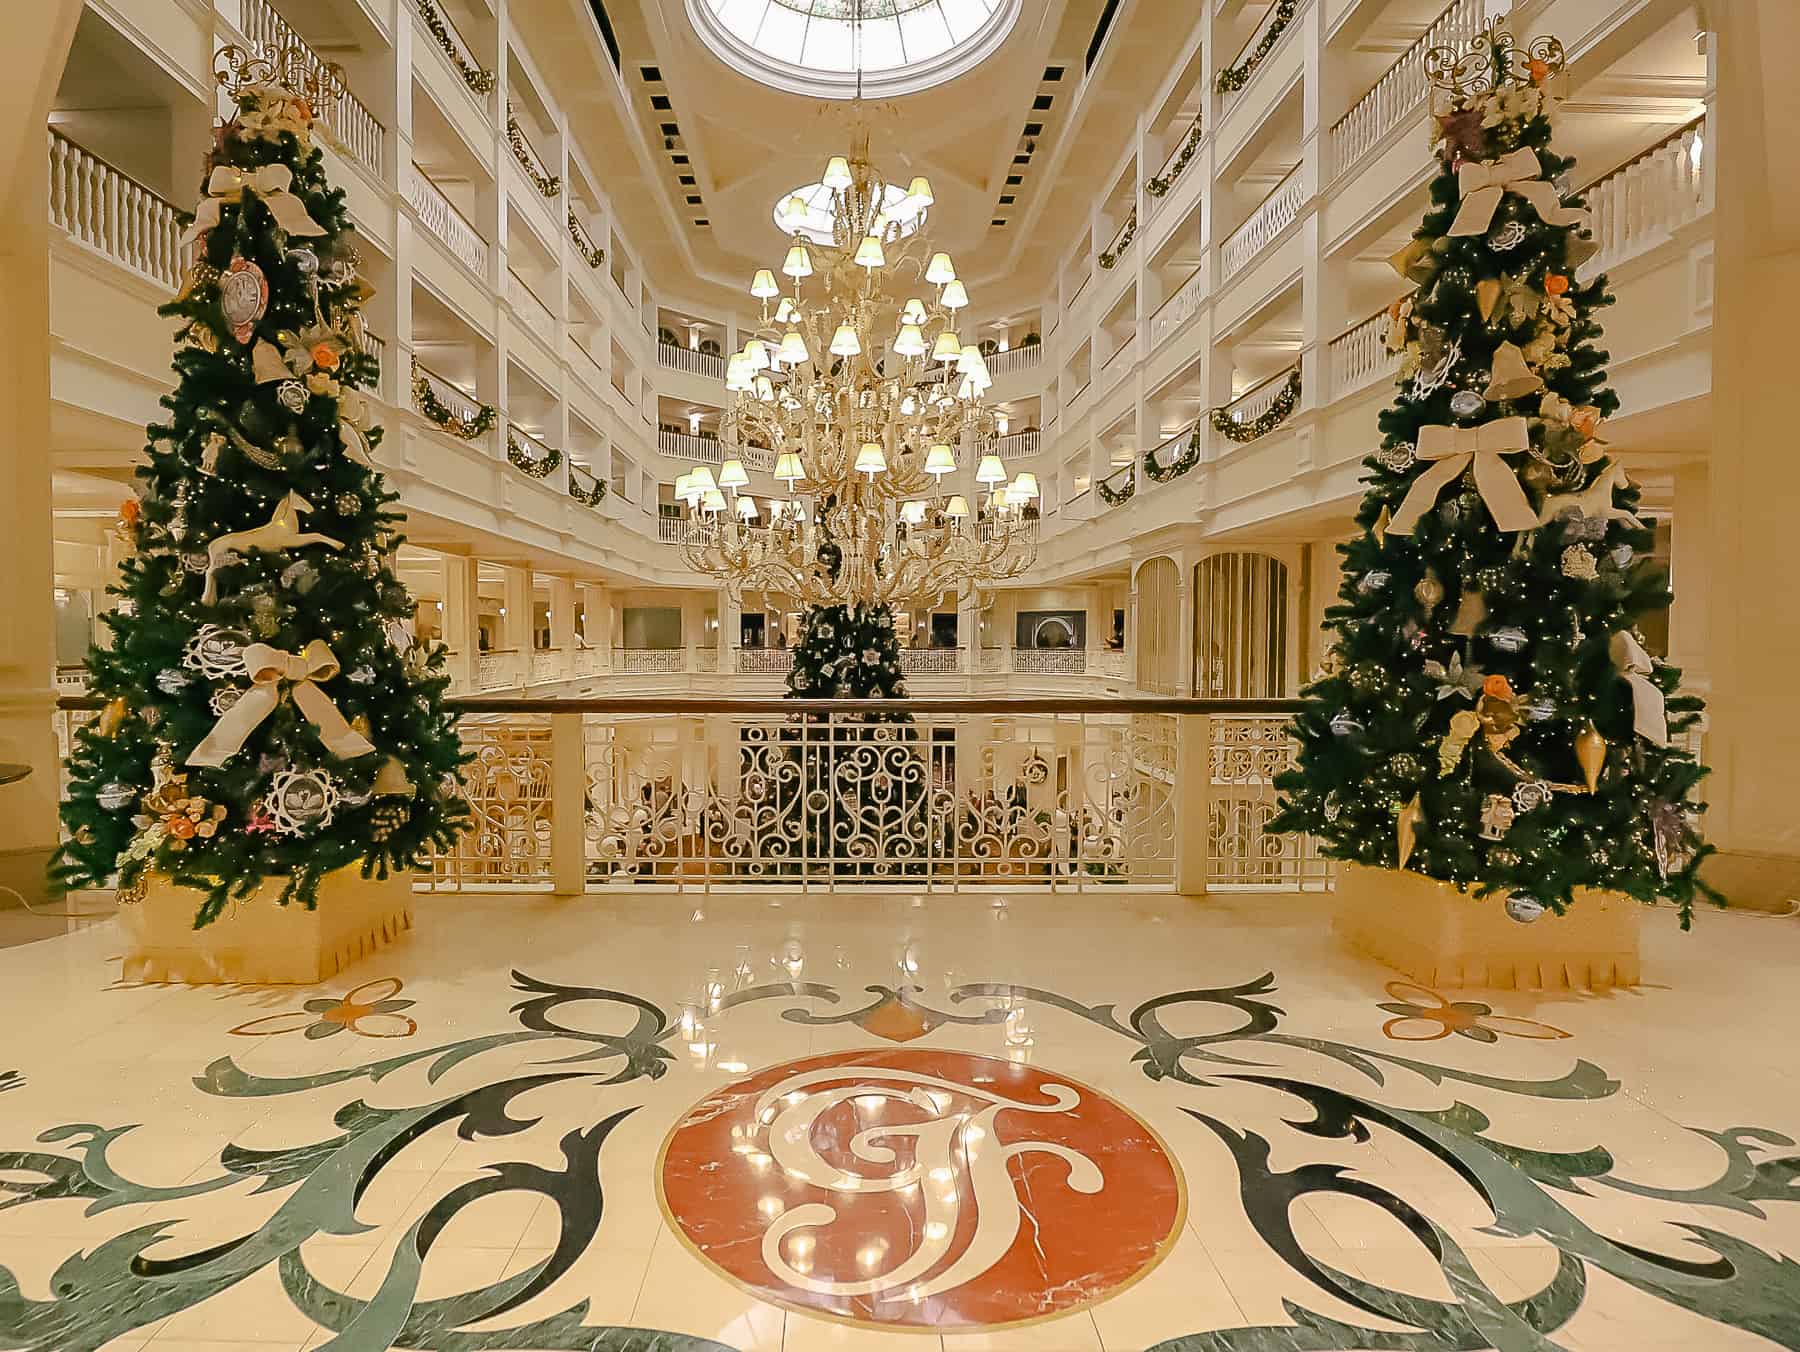 Two trees sit on each side of the Grand Floridian's logo in the marble tile flooring. 